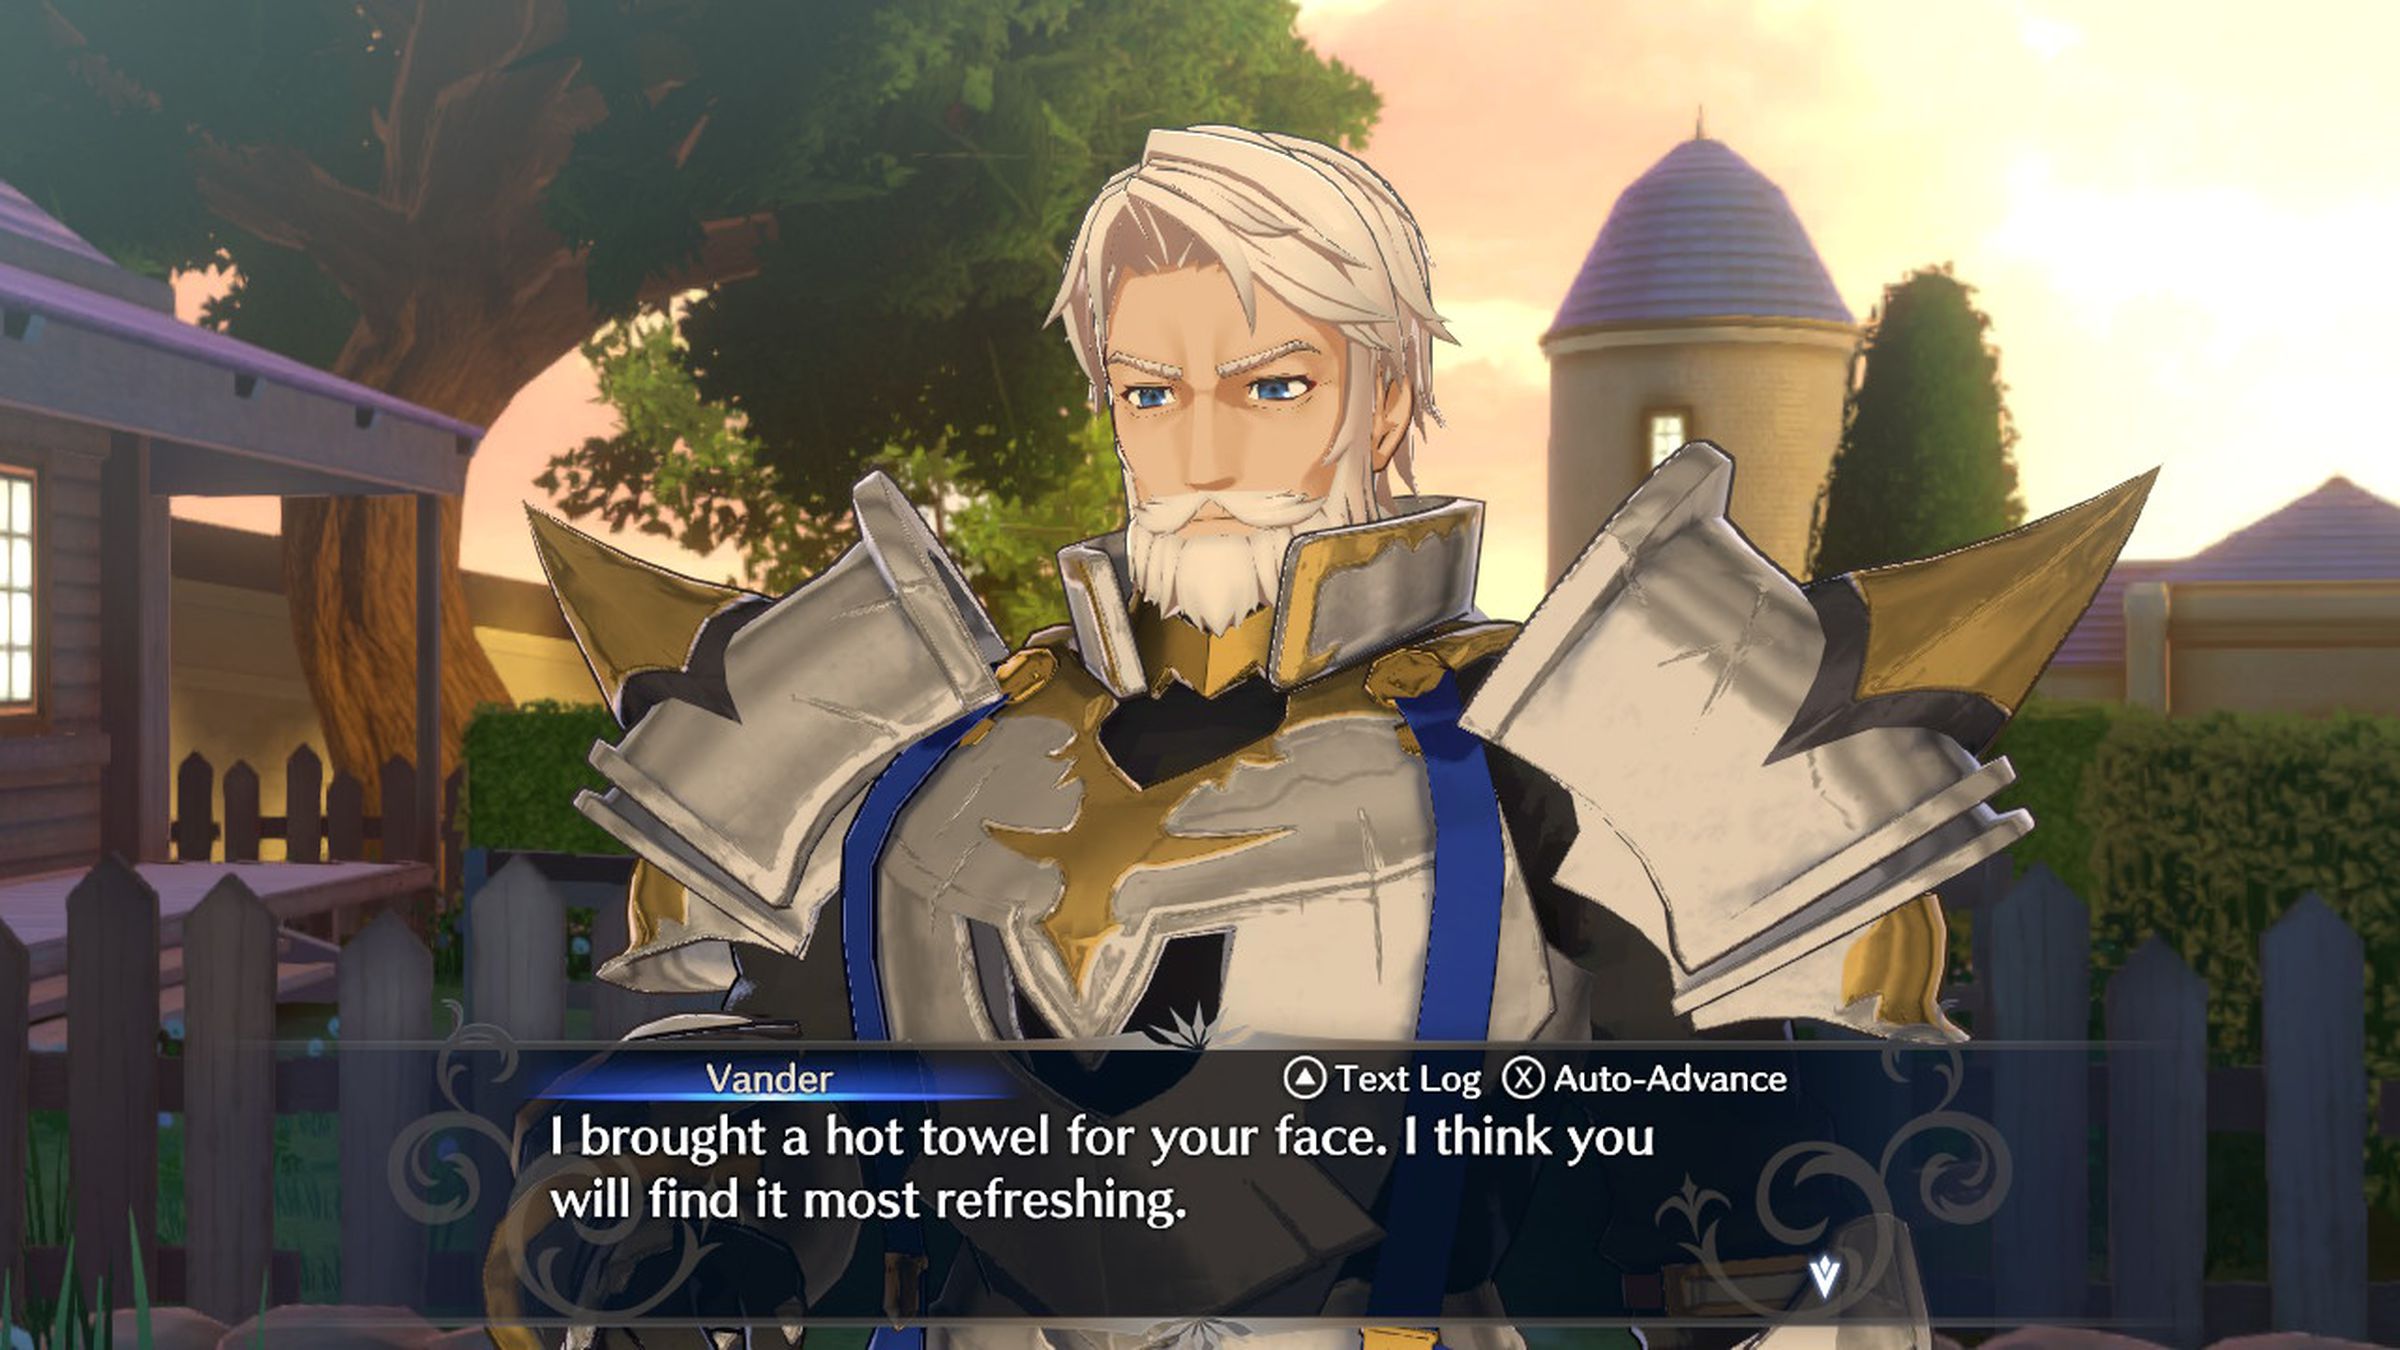 Screenshot from Fire Emblem Engage showing the heavily armored character Vander talking to the main character Alear